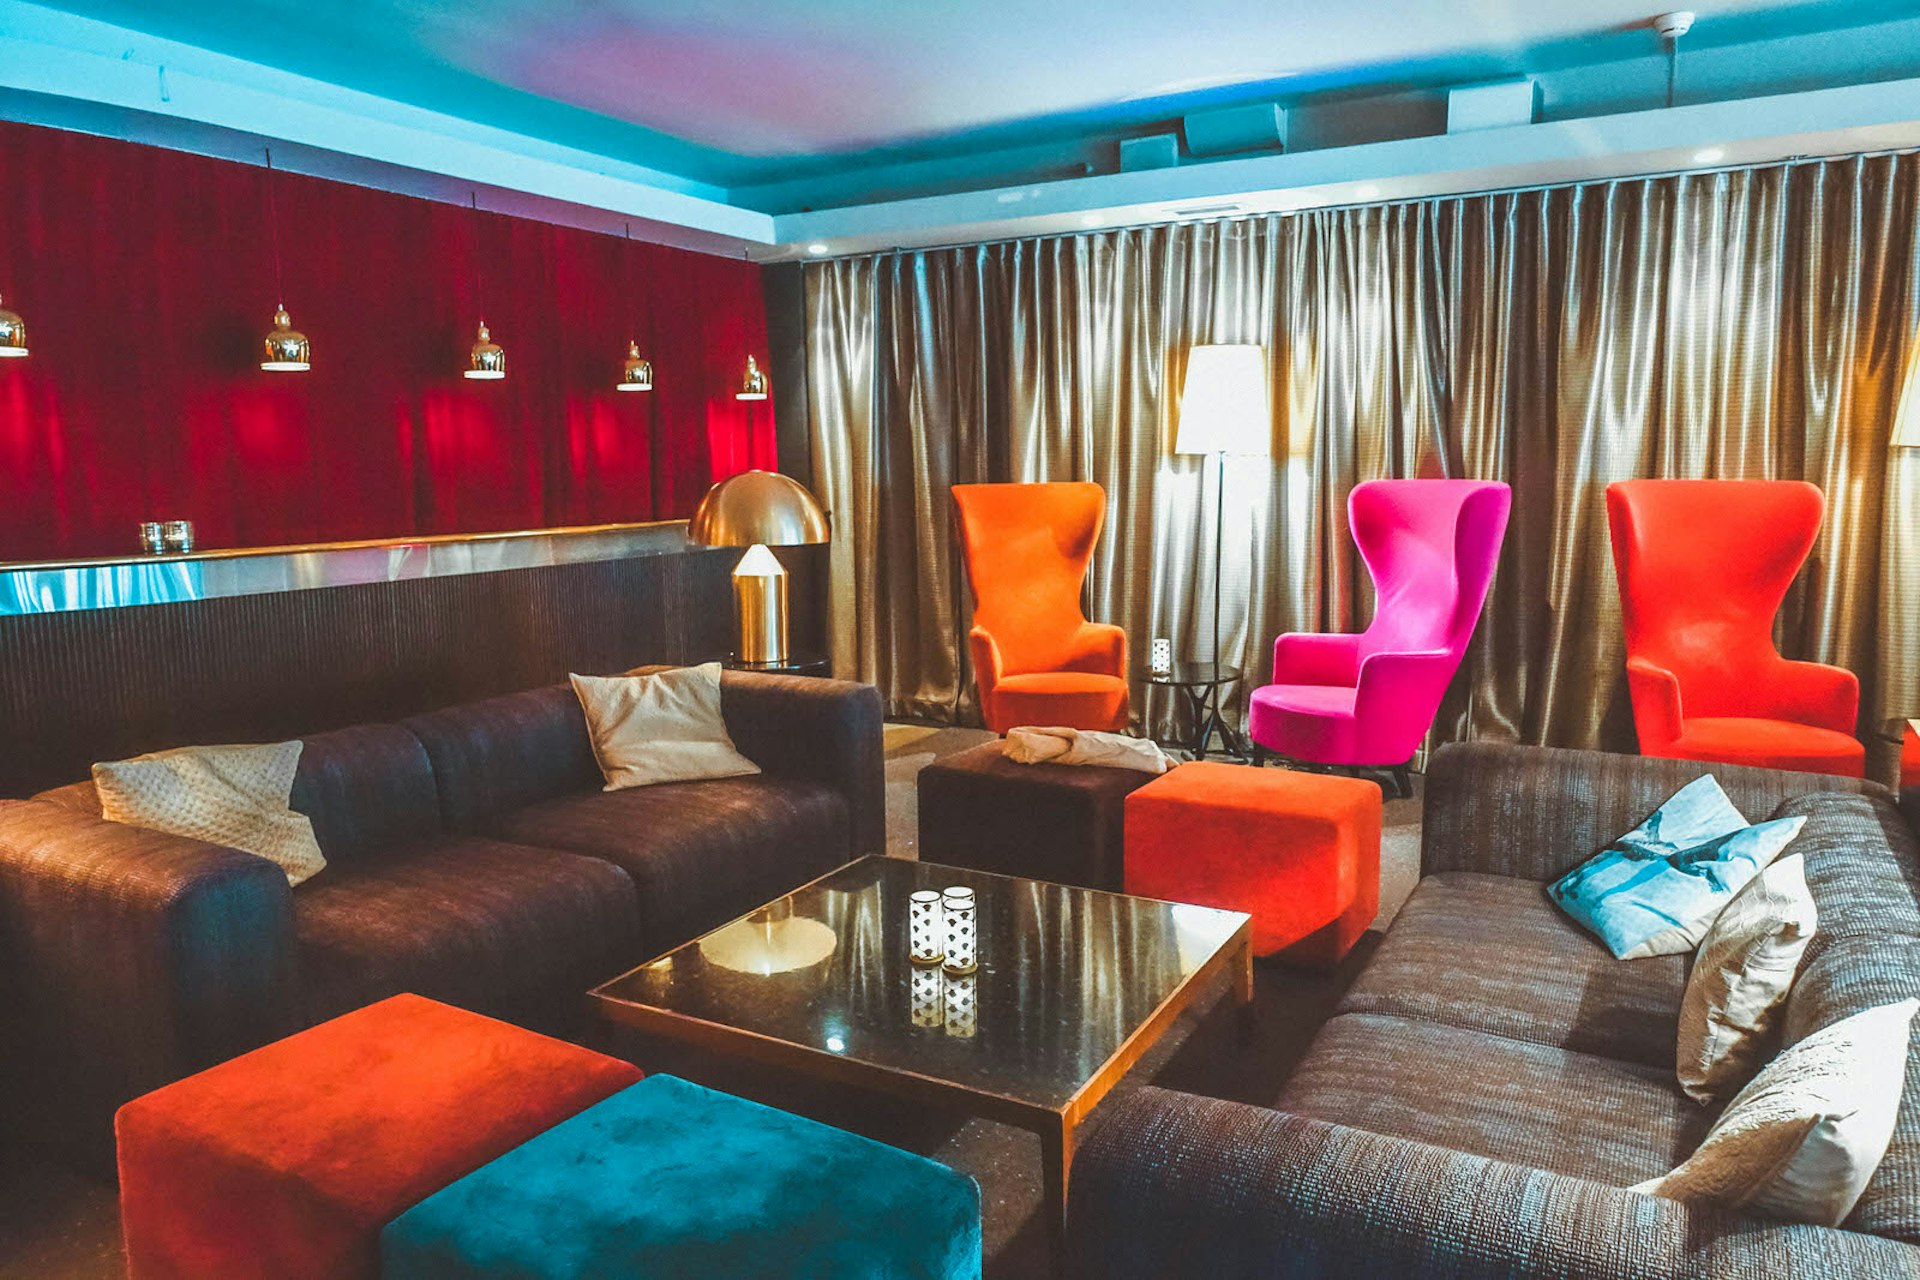 Interior shot of Hotel Rival, showing the colourful, plush furniture in the lounge area © Megan & Whitney Bacon-Evans / Lonely Planet